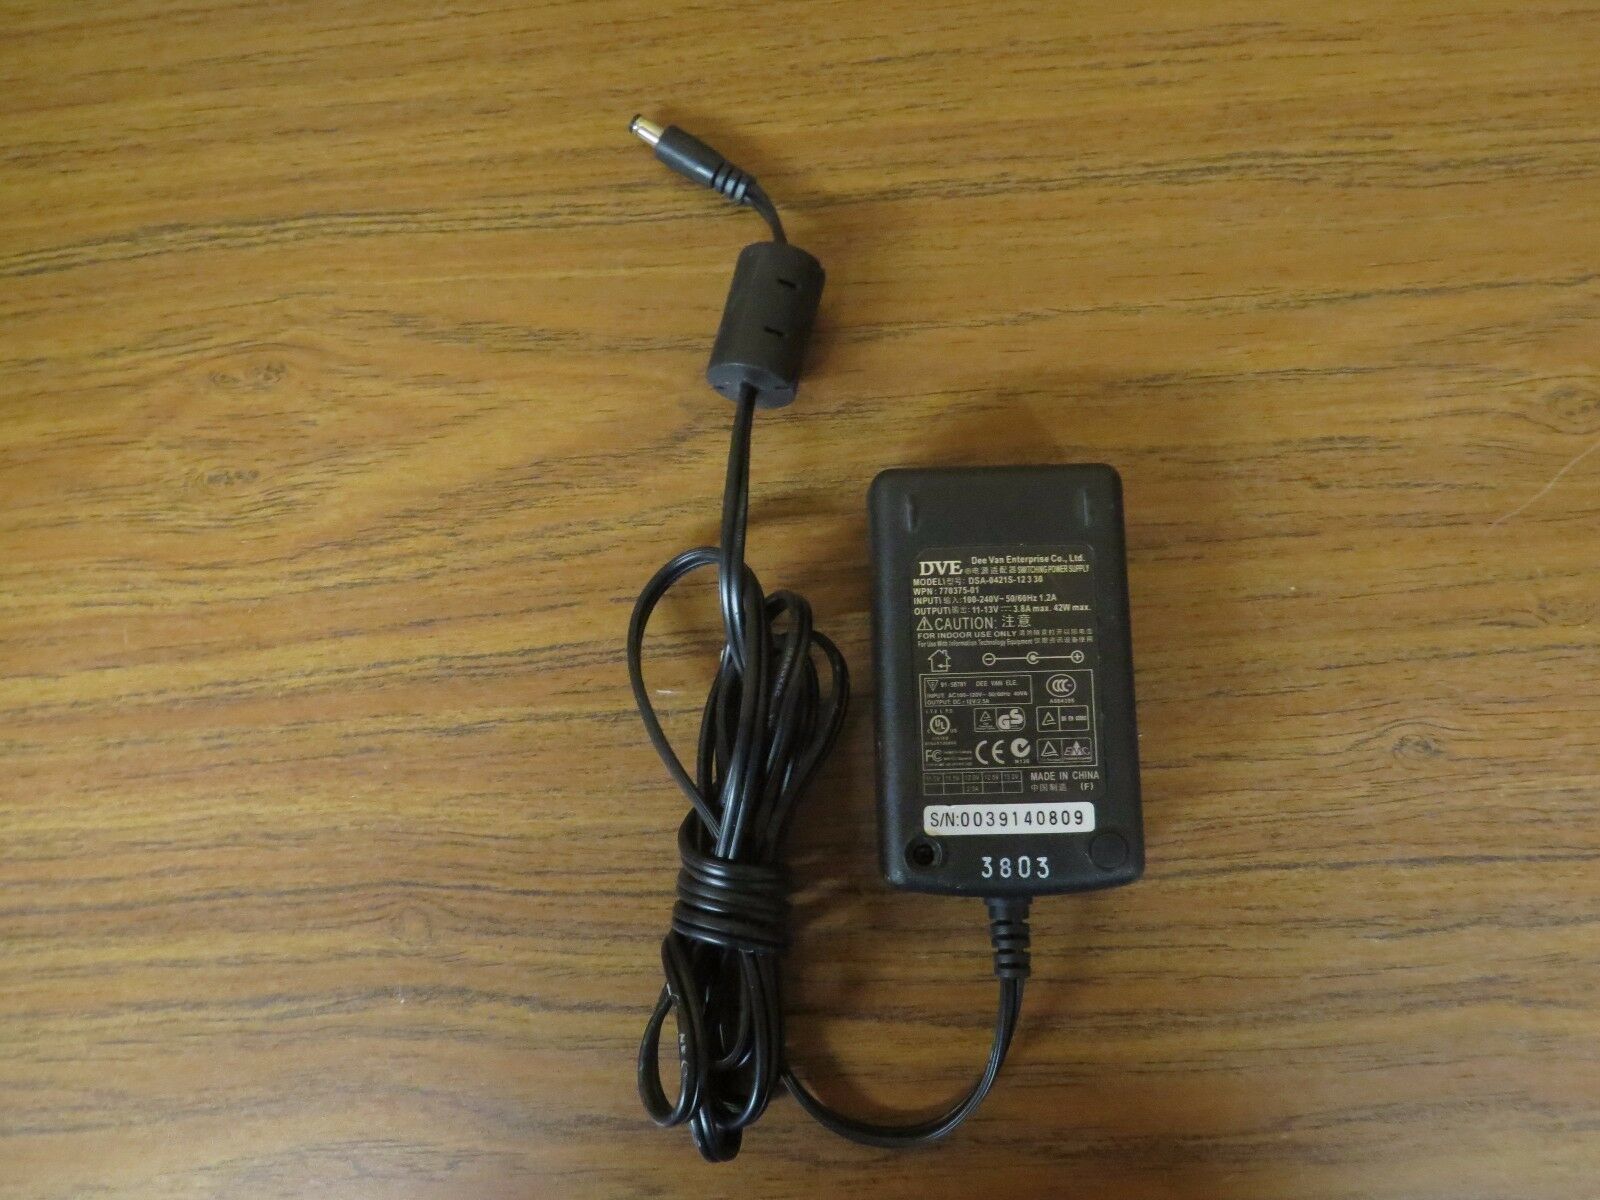 DVE AC Adapter Power Supply Cord Charger DSA-0421S-12 3 30 PN 770375-01 Type: AC/Standard MPN: 770375 01 Brand: DVE